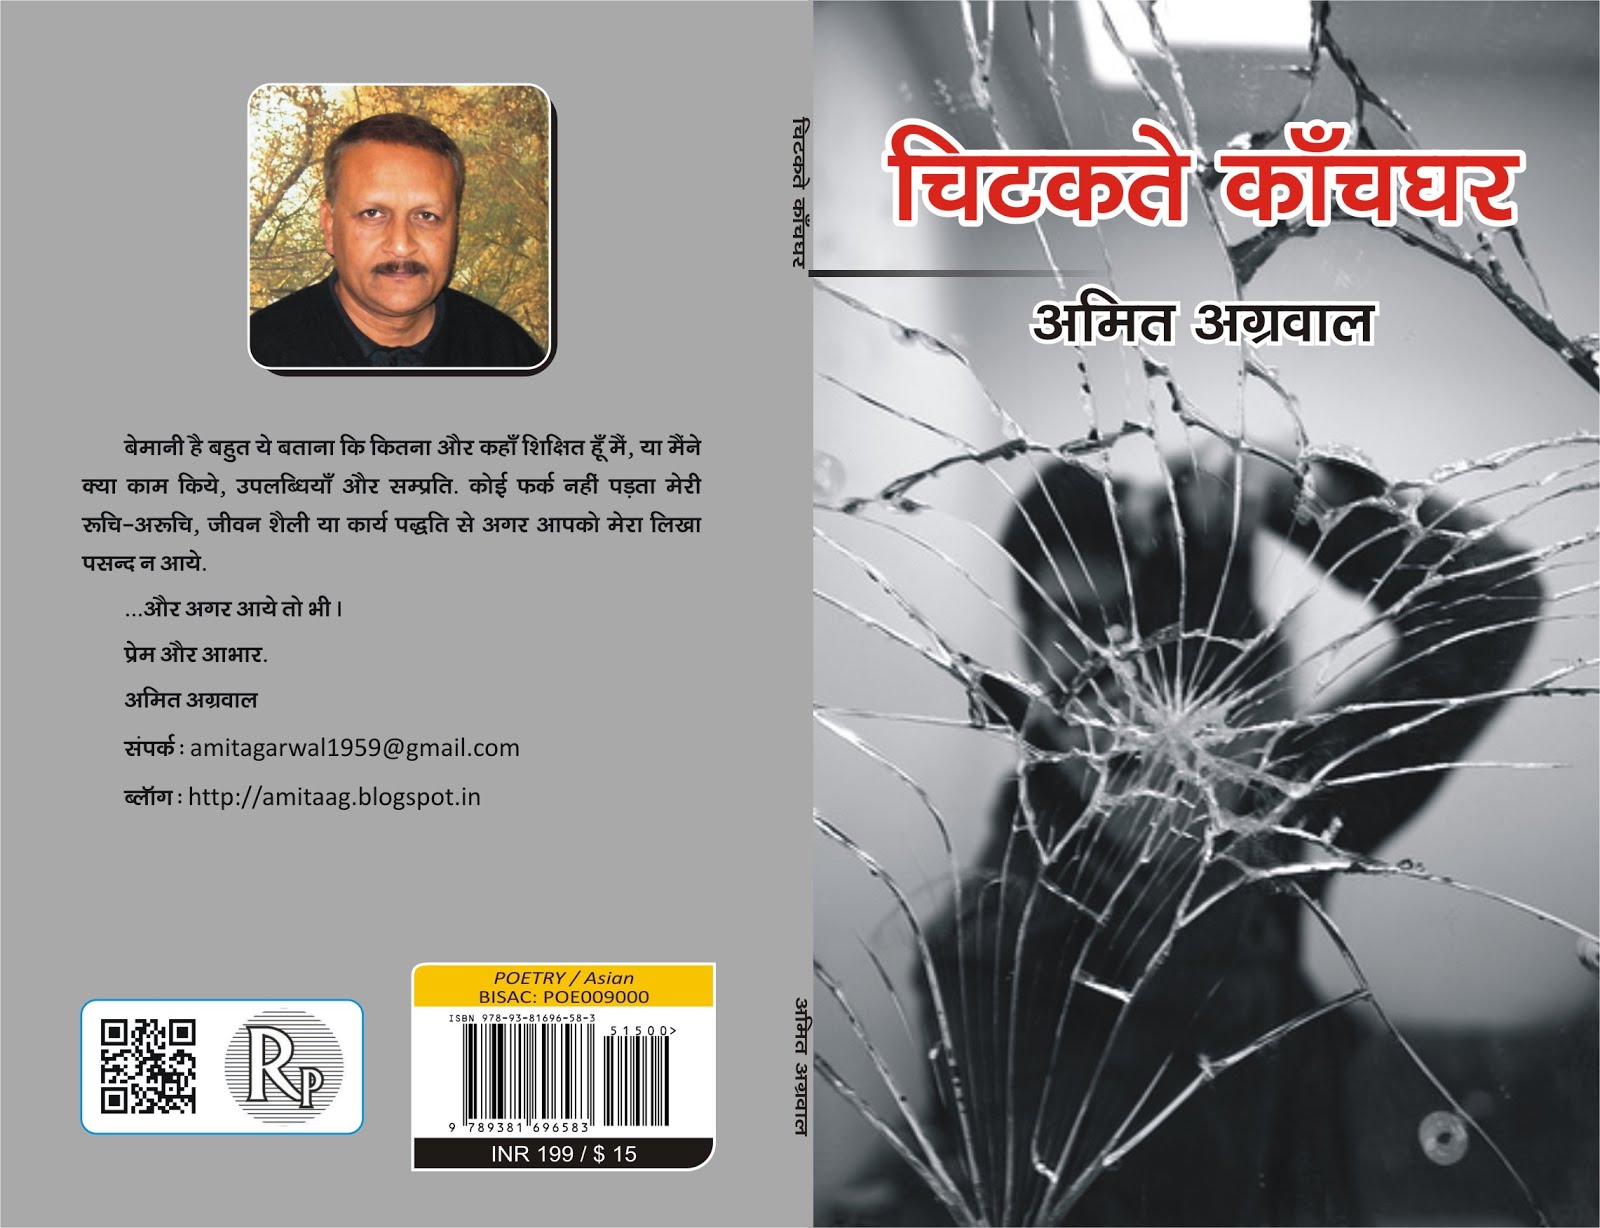 My solo collection of Hindi poems